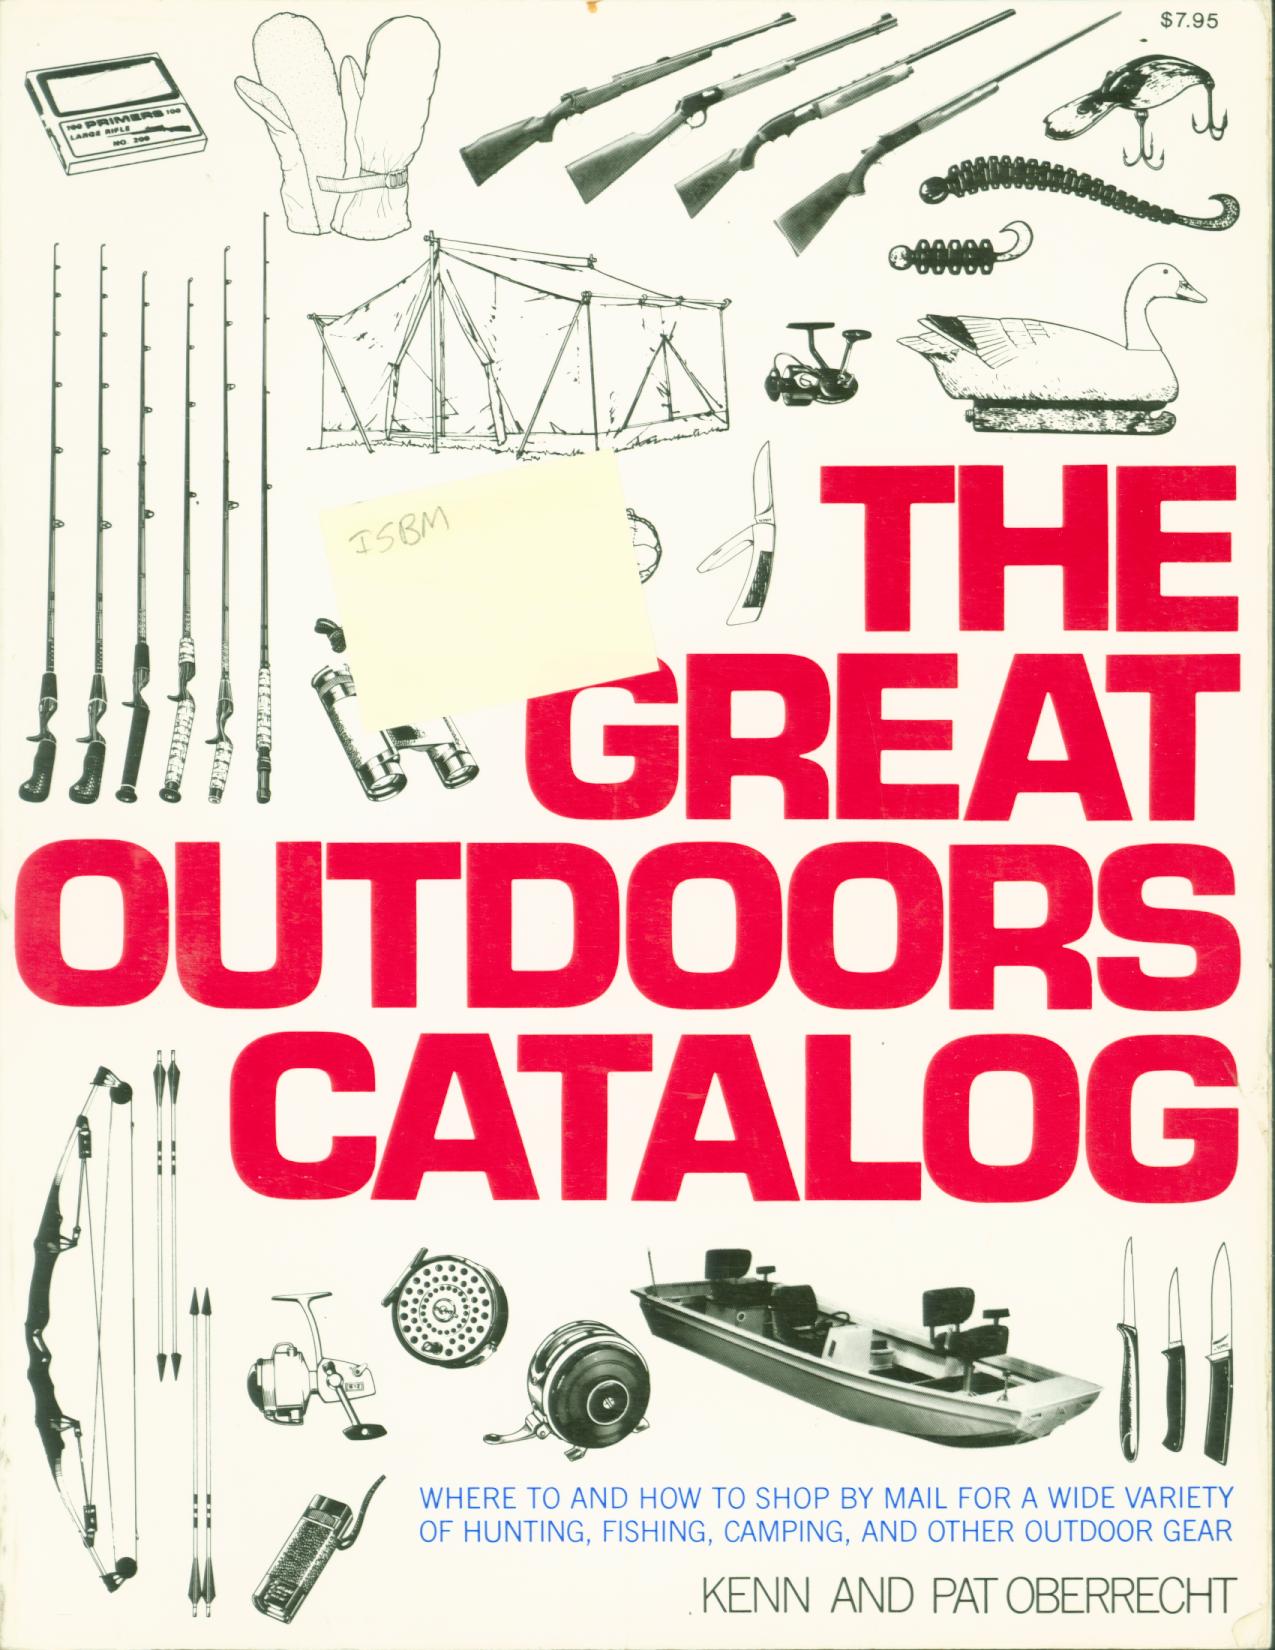 THE GREAT OUTDOORS CATALOG. 